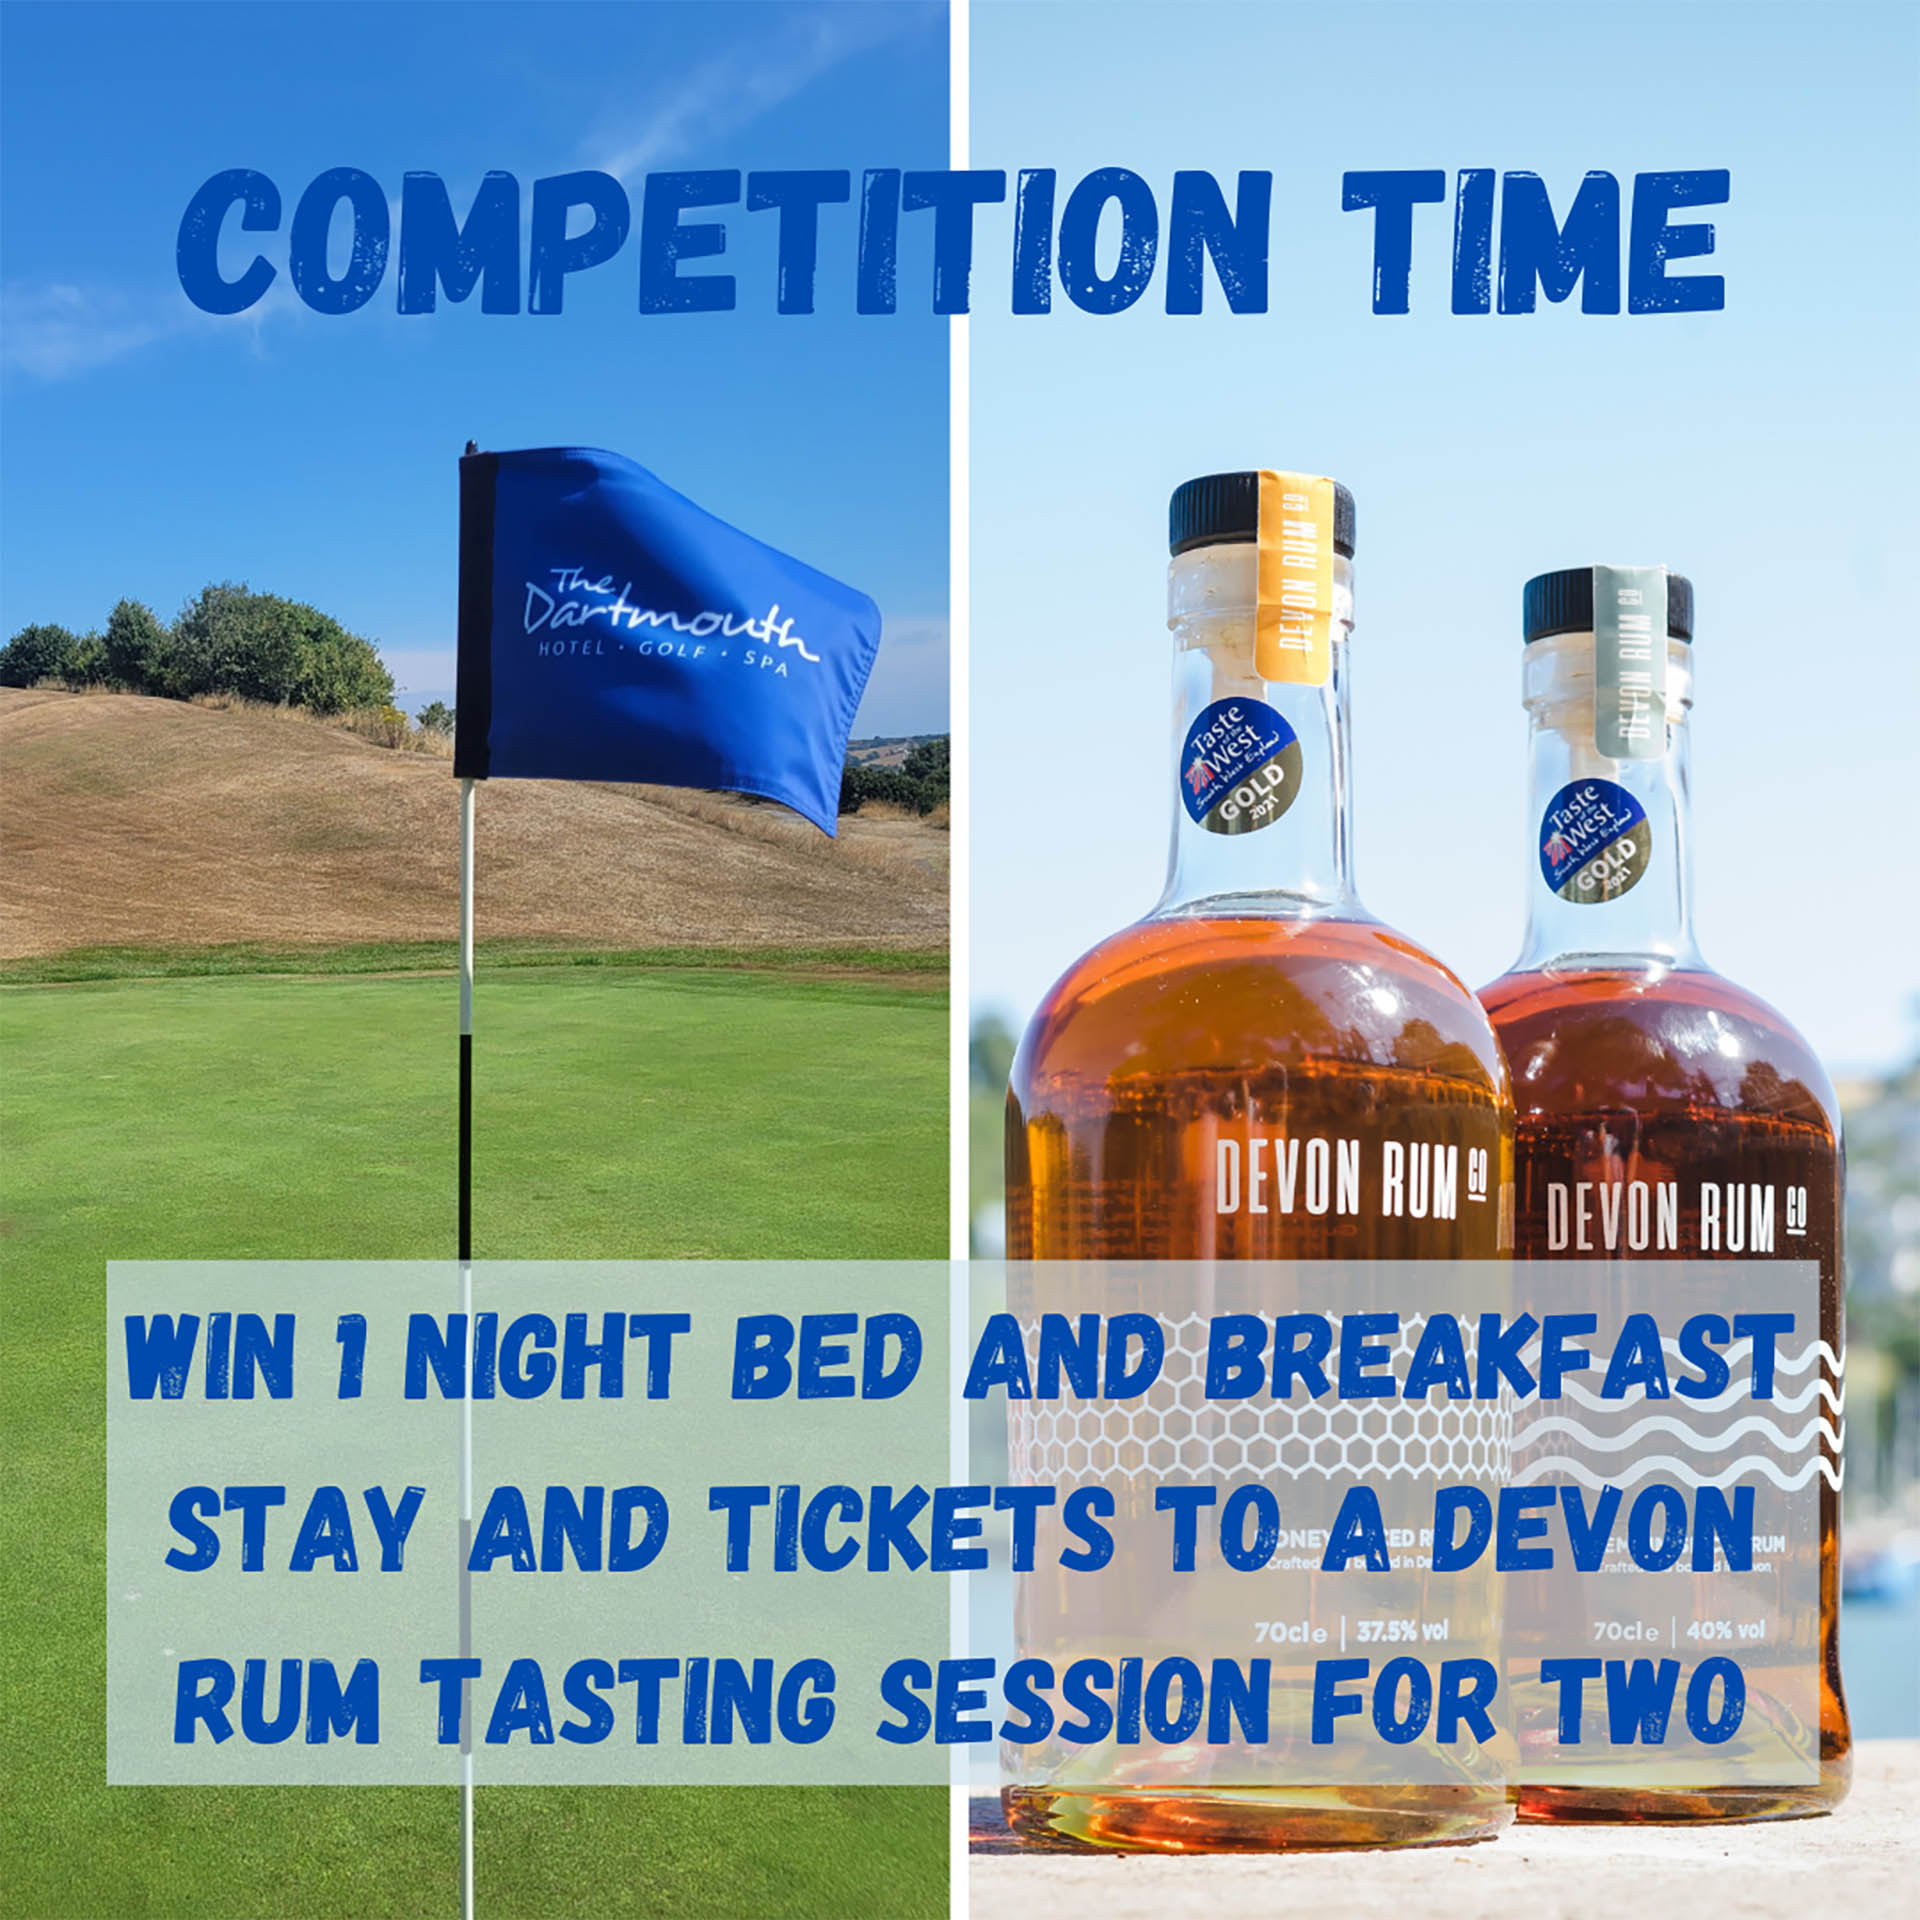 Competition Time at the Dartmouth Hotel Golf and Spa